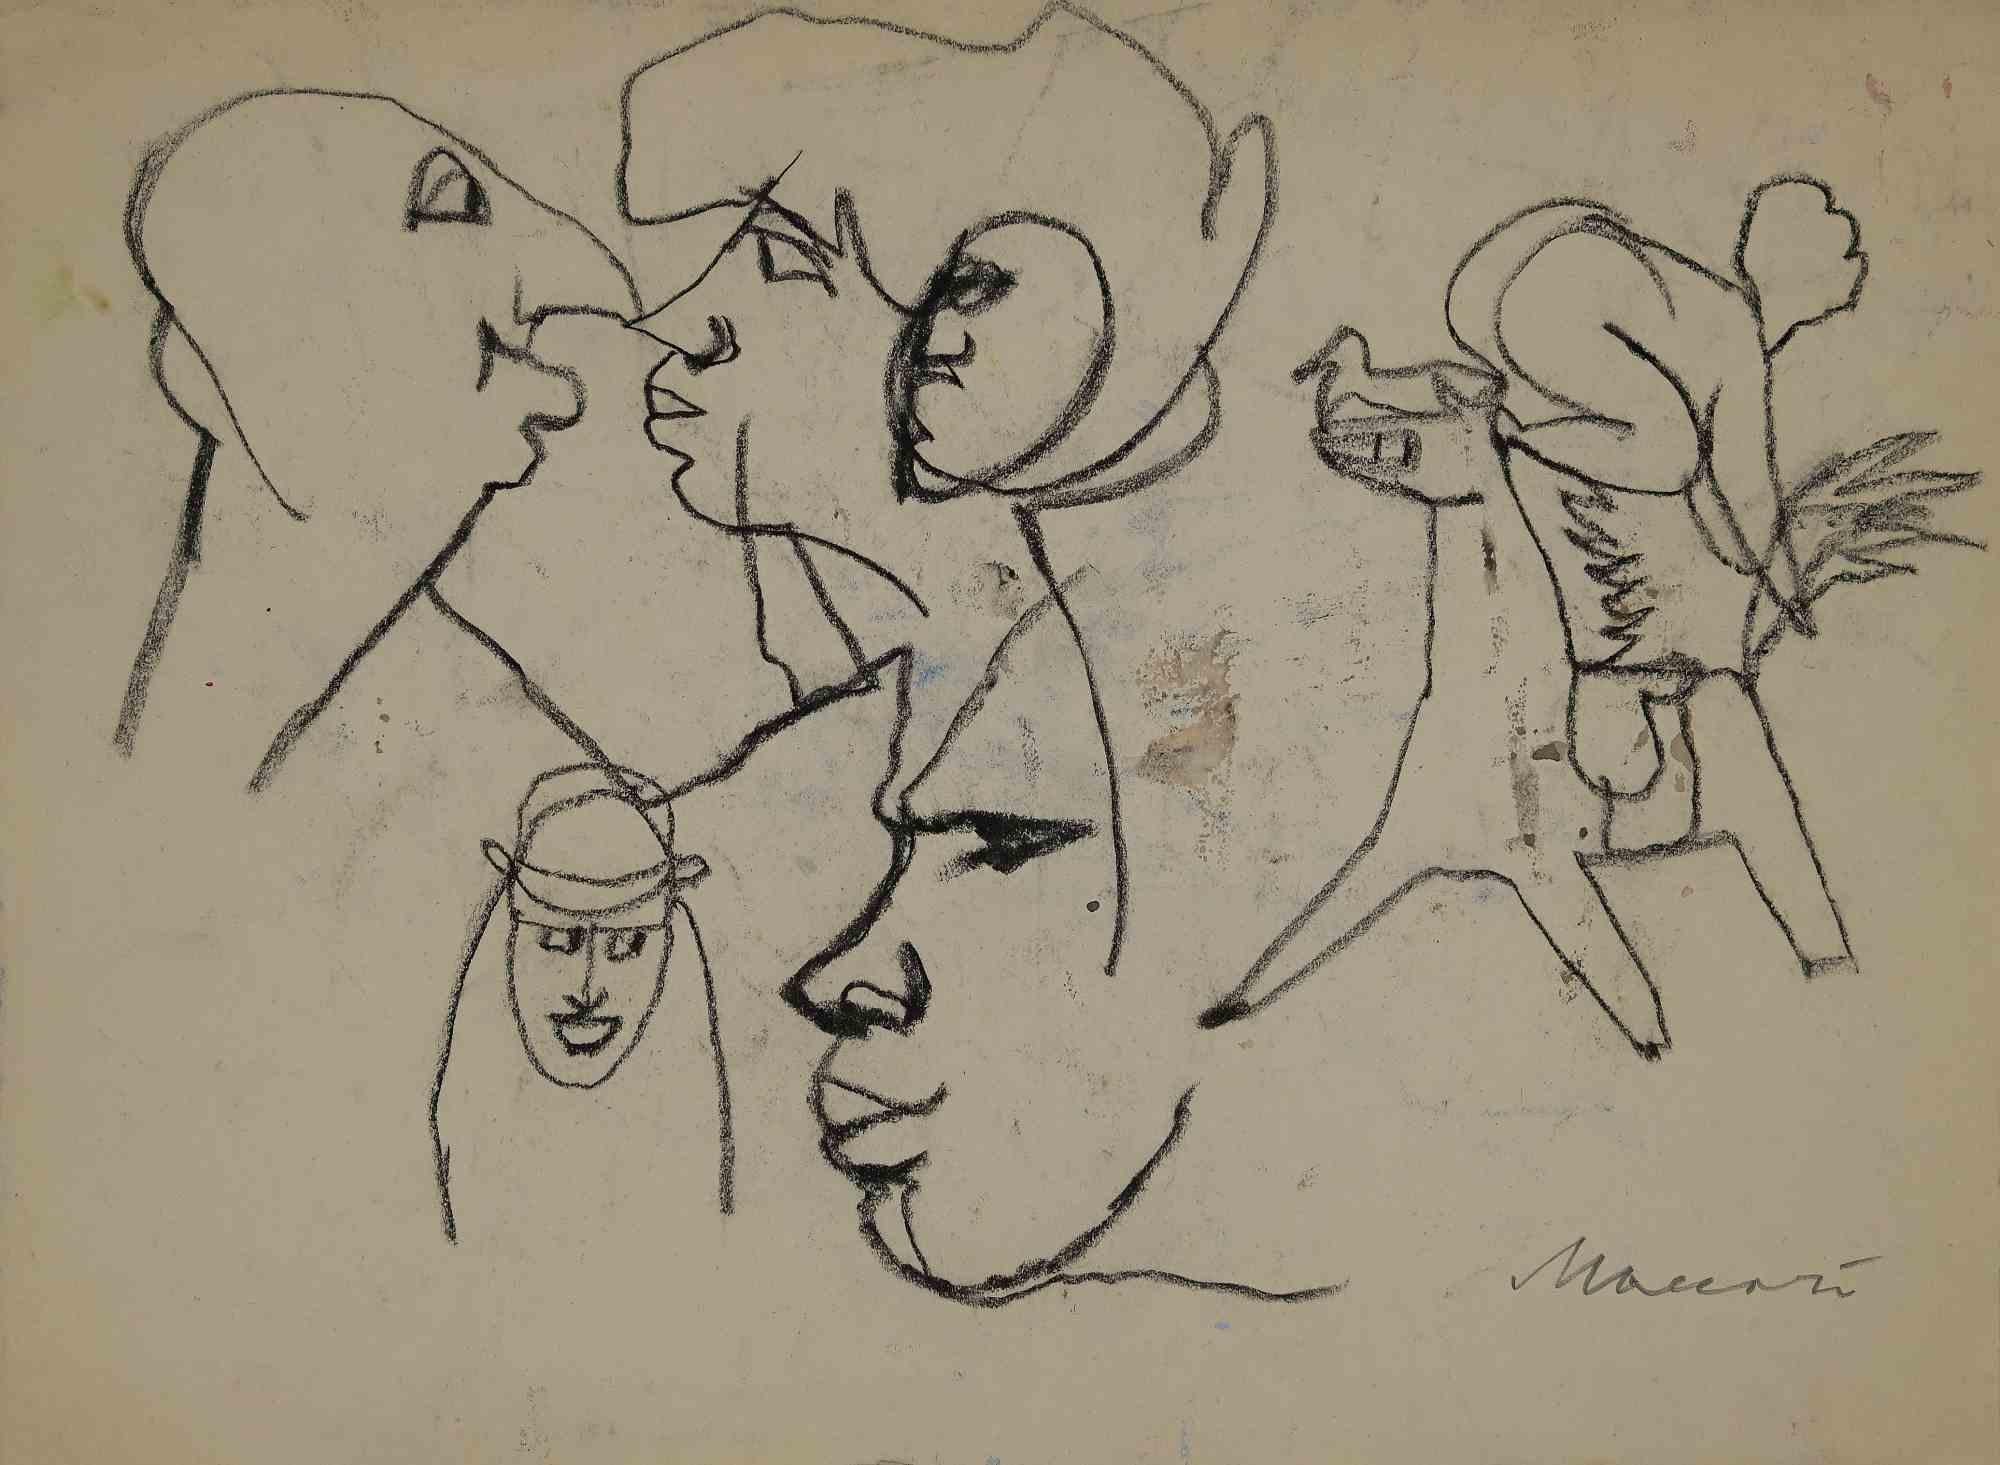 Sketches is an original Charcoal Drawing realized by Mino Maccari in mid-20th century.

Good condition except for some spots on a white paper.

Hand-signed by the artist with pencil.

Mino Maccari (1898-1989) was an Italian writer, painter, engraver